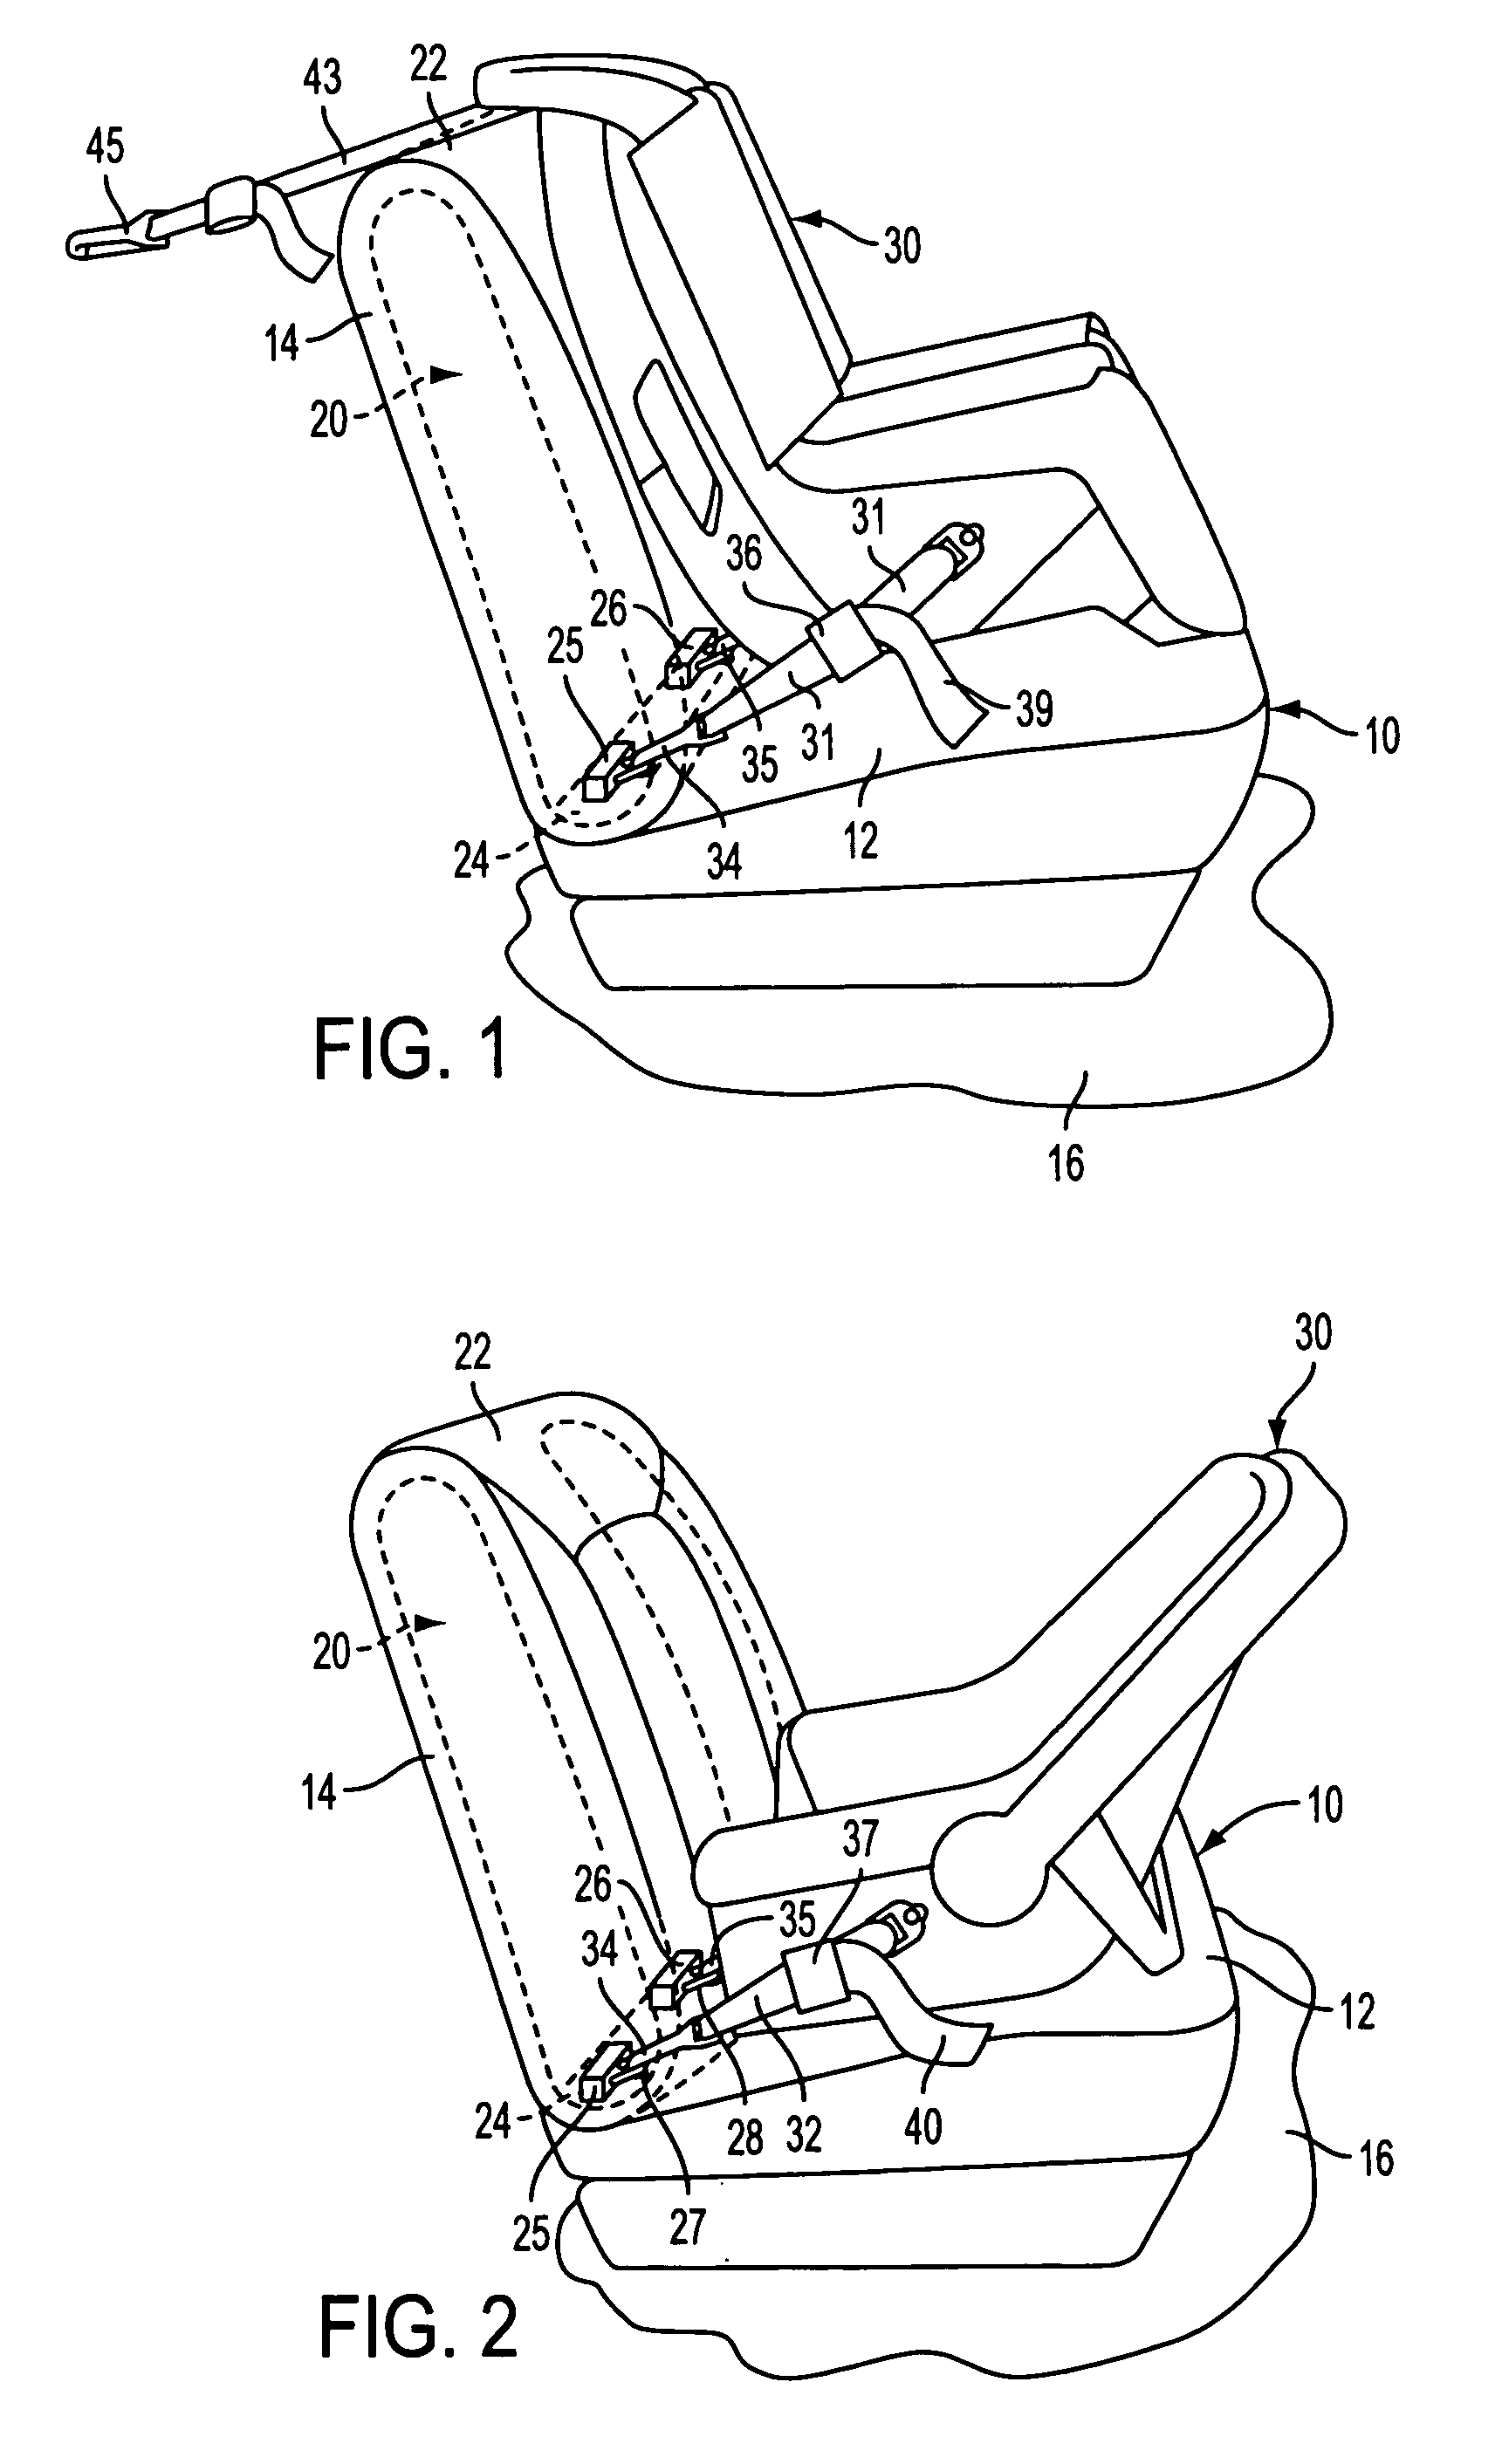 Child restraint seat anchors with integrated child seat detectors